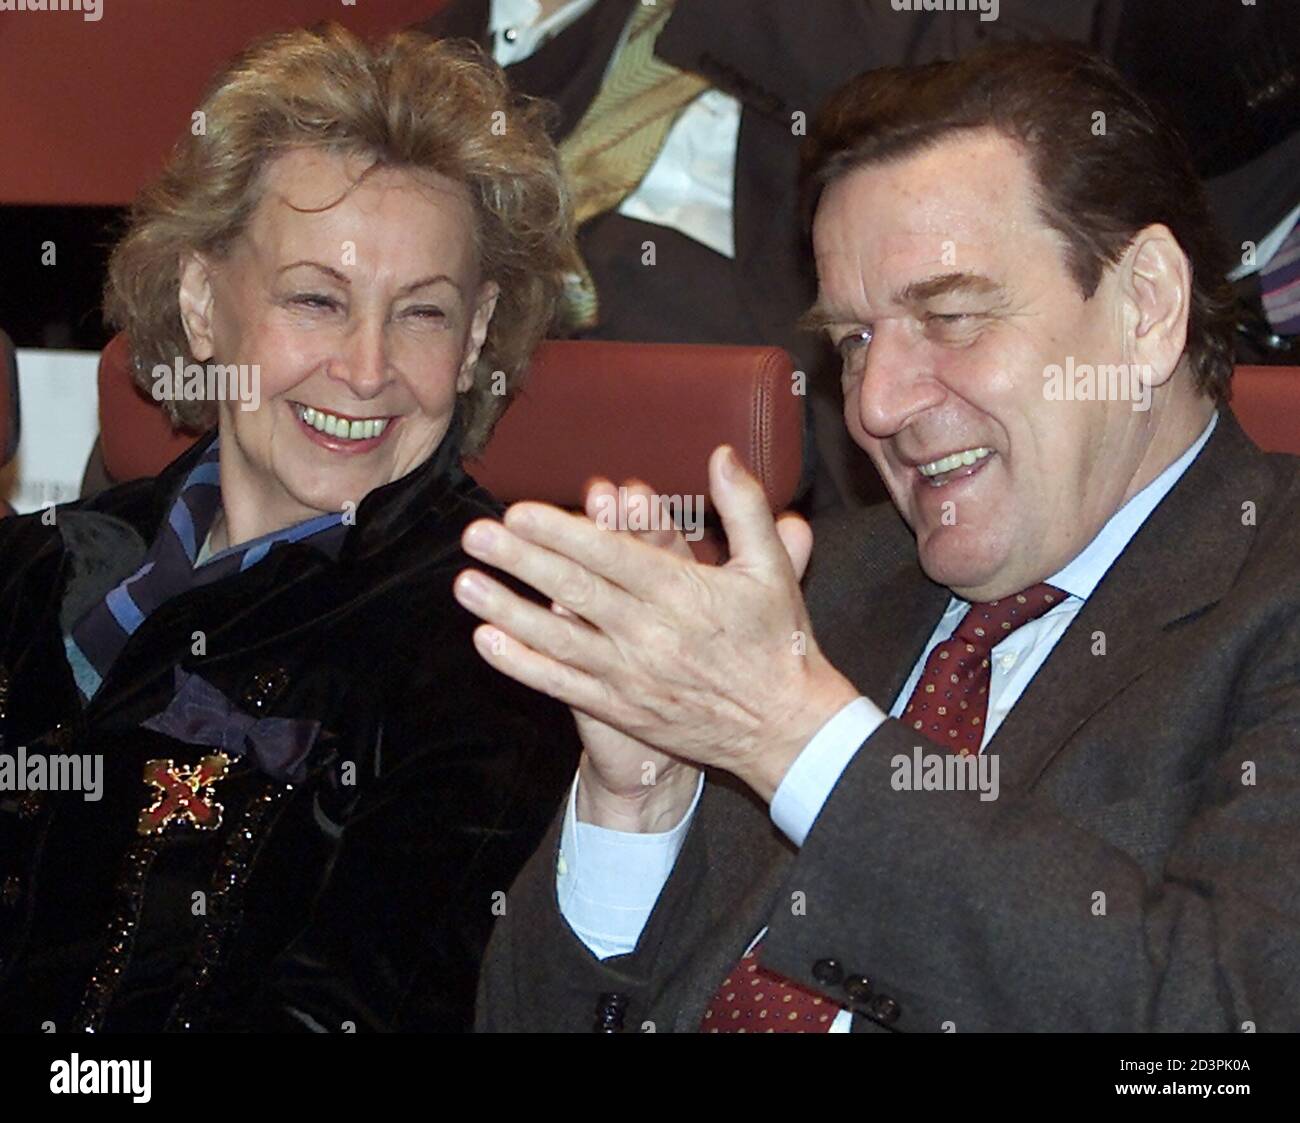 Rut Brandt (L), widow of former German Chancellor Willy Brandt smiles as she sits beside German Chancellor Gerhard Schroeder during a ceremony at the Norwegian embassy in Berlin December 3, 2001. Rut Brandt was honoured with the Norwegian royal medal for her services to Norway. REUTERS/Tobias Schwarz REUTERS  FAB/JOH Stock Photo